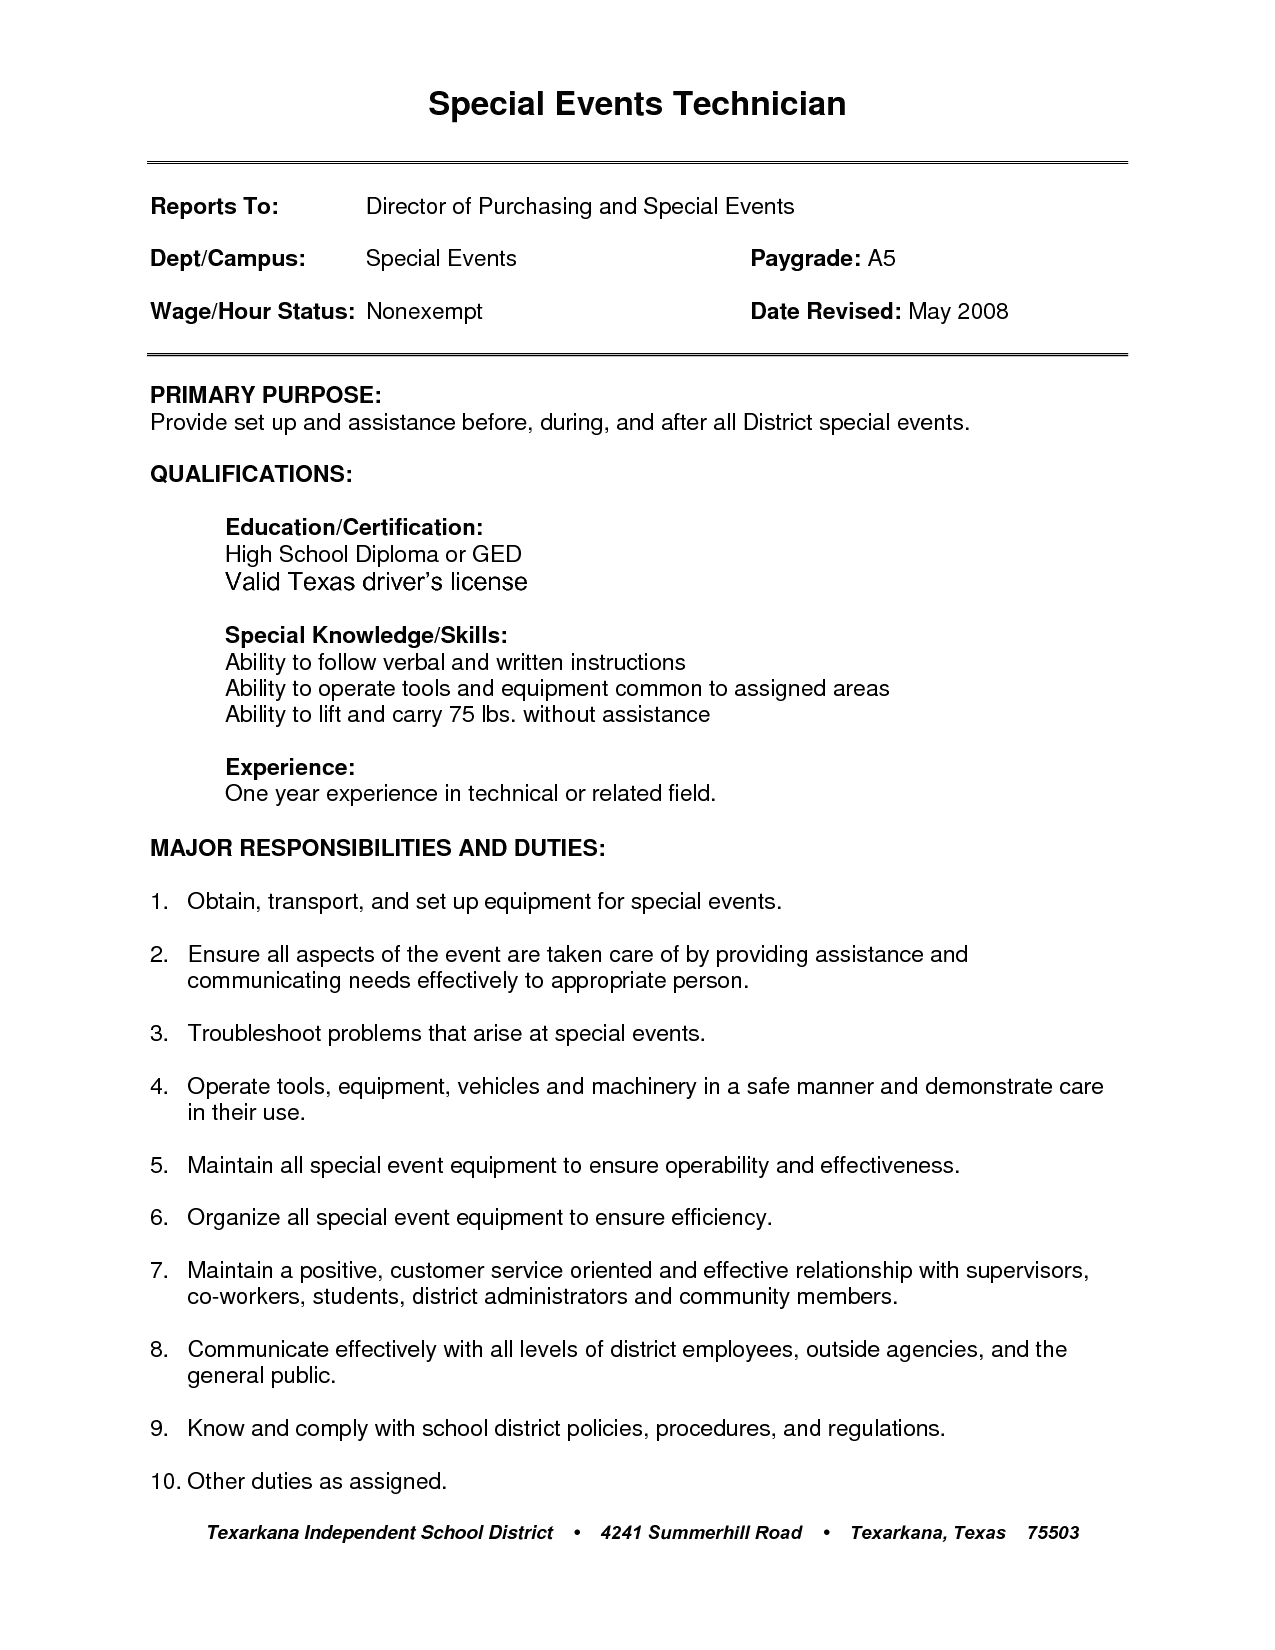 Resume Examples General Labor 